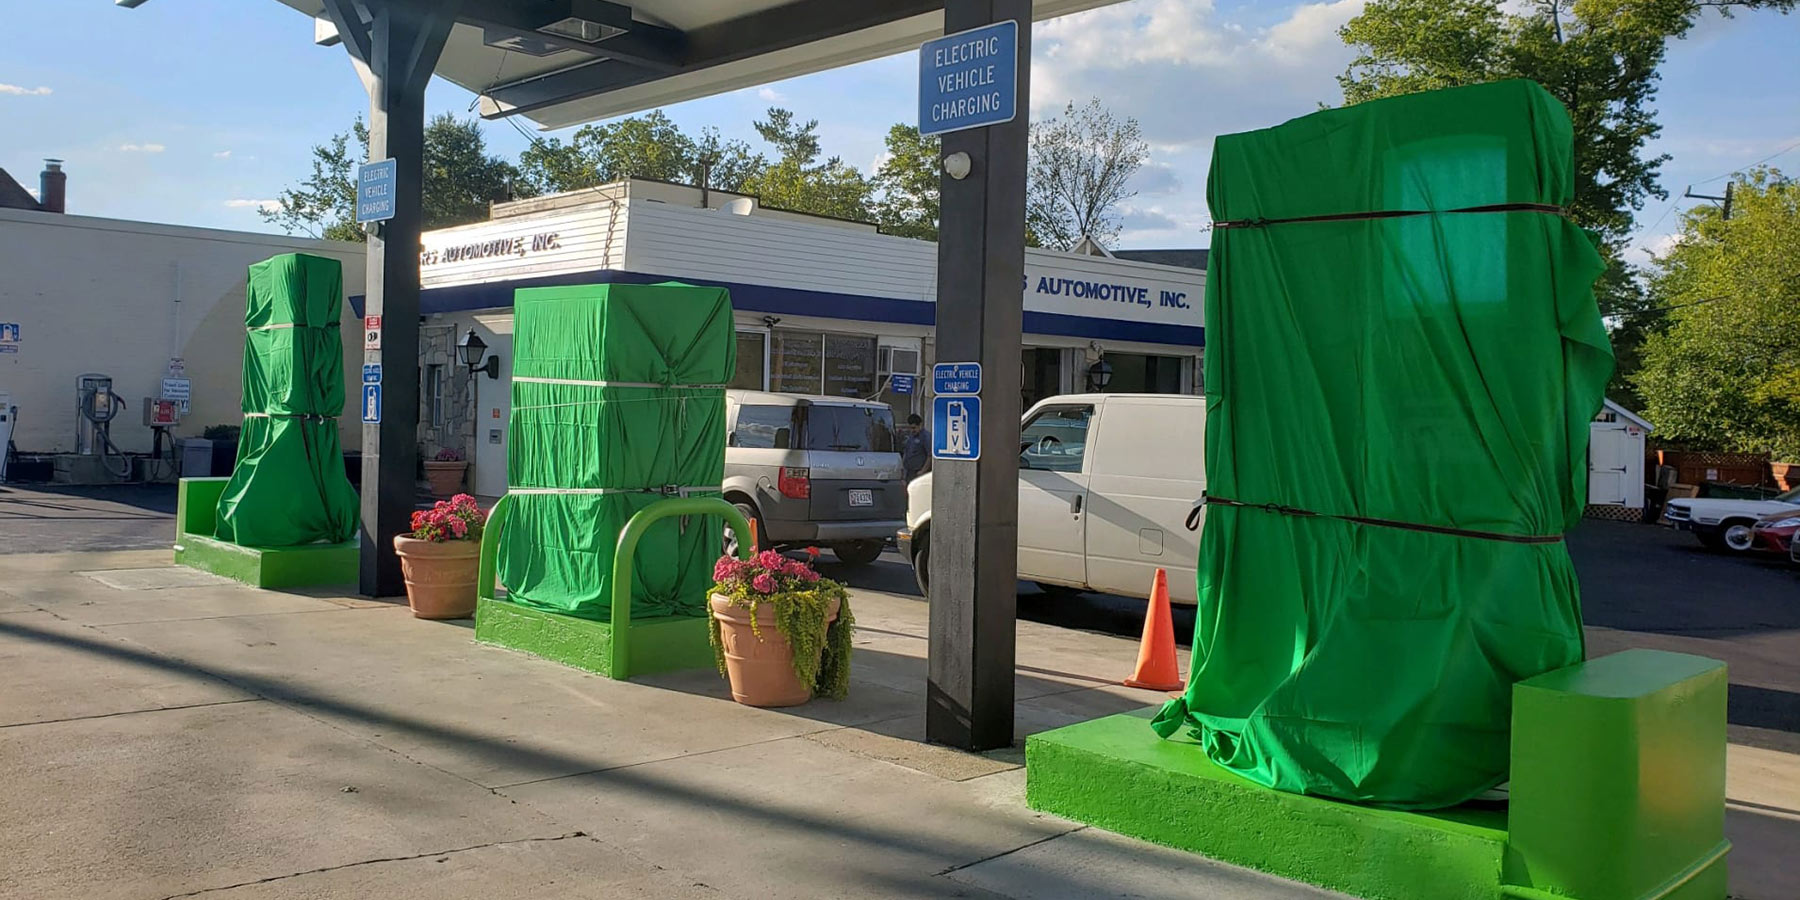 The first gas station to be converted to electric charging. It happened in September 2019 in Takoma Park, Maryland.